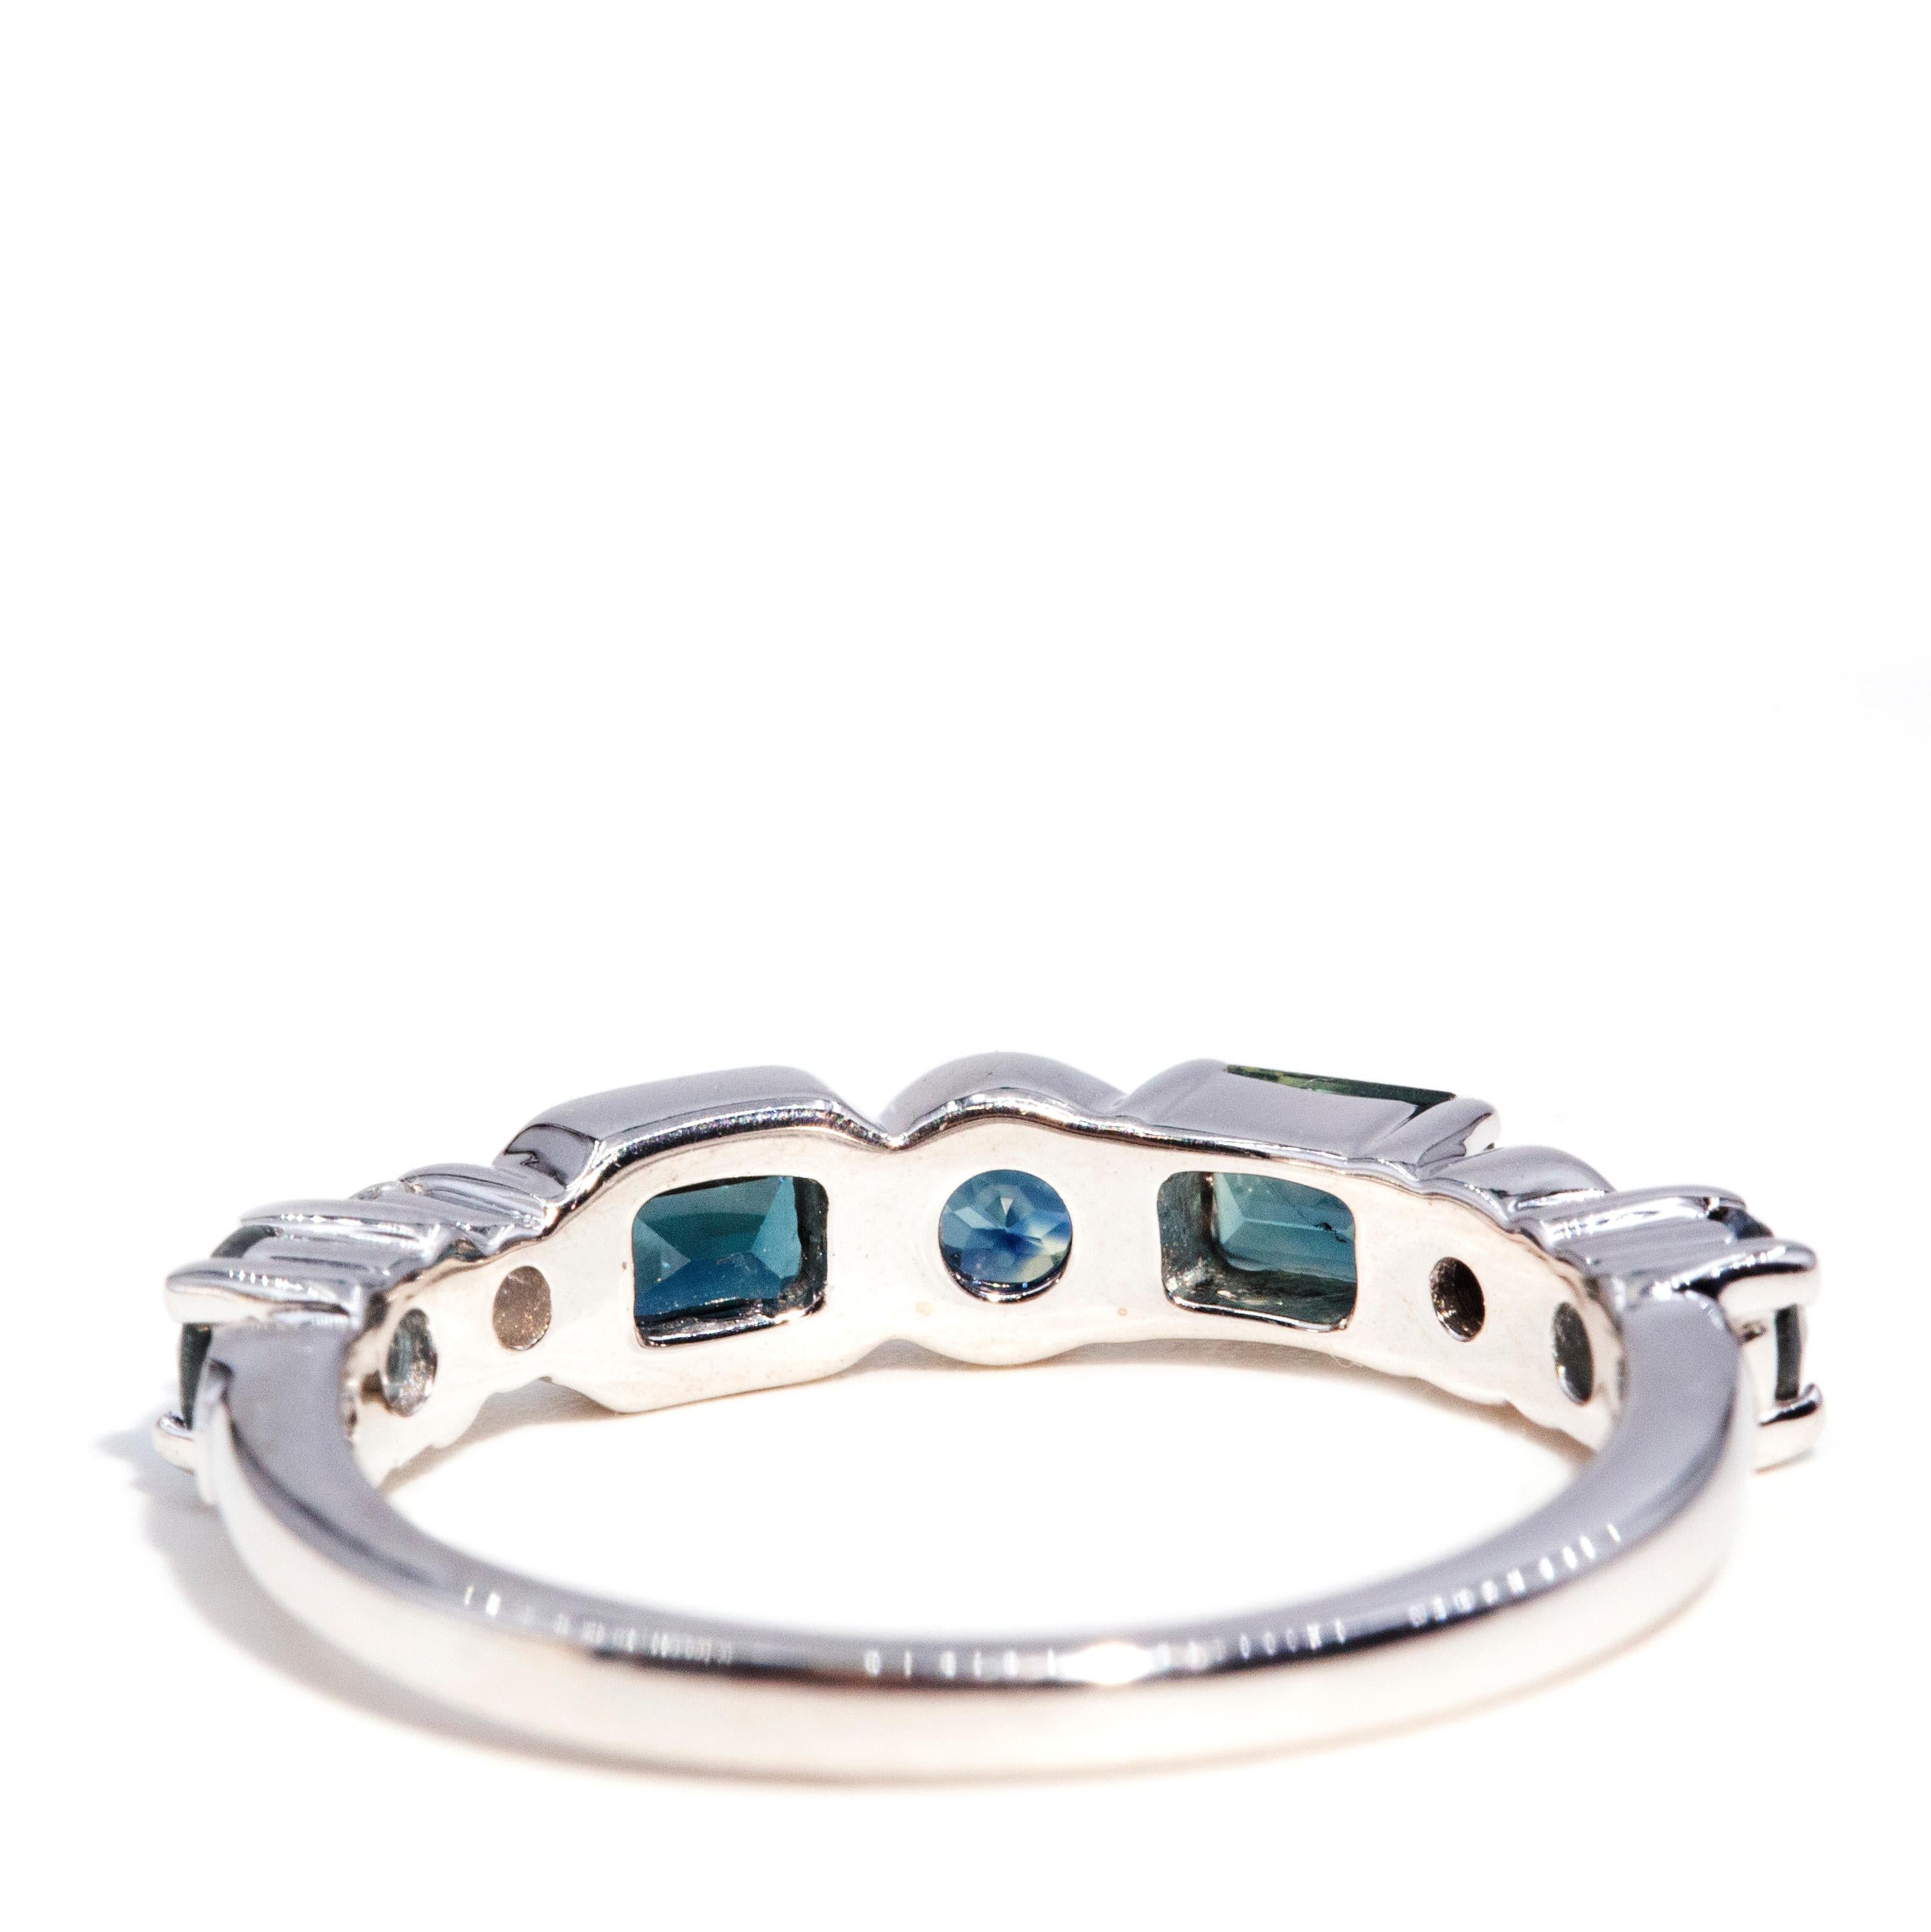 Contemporary 1.11 Carat Teal & Blue Sapphire & Diamond 18 Carat White Gold Ring For Sale 2